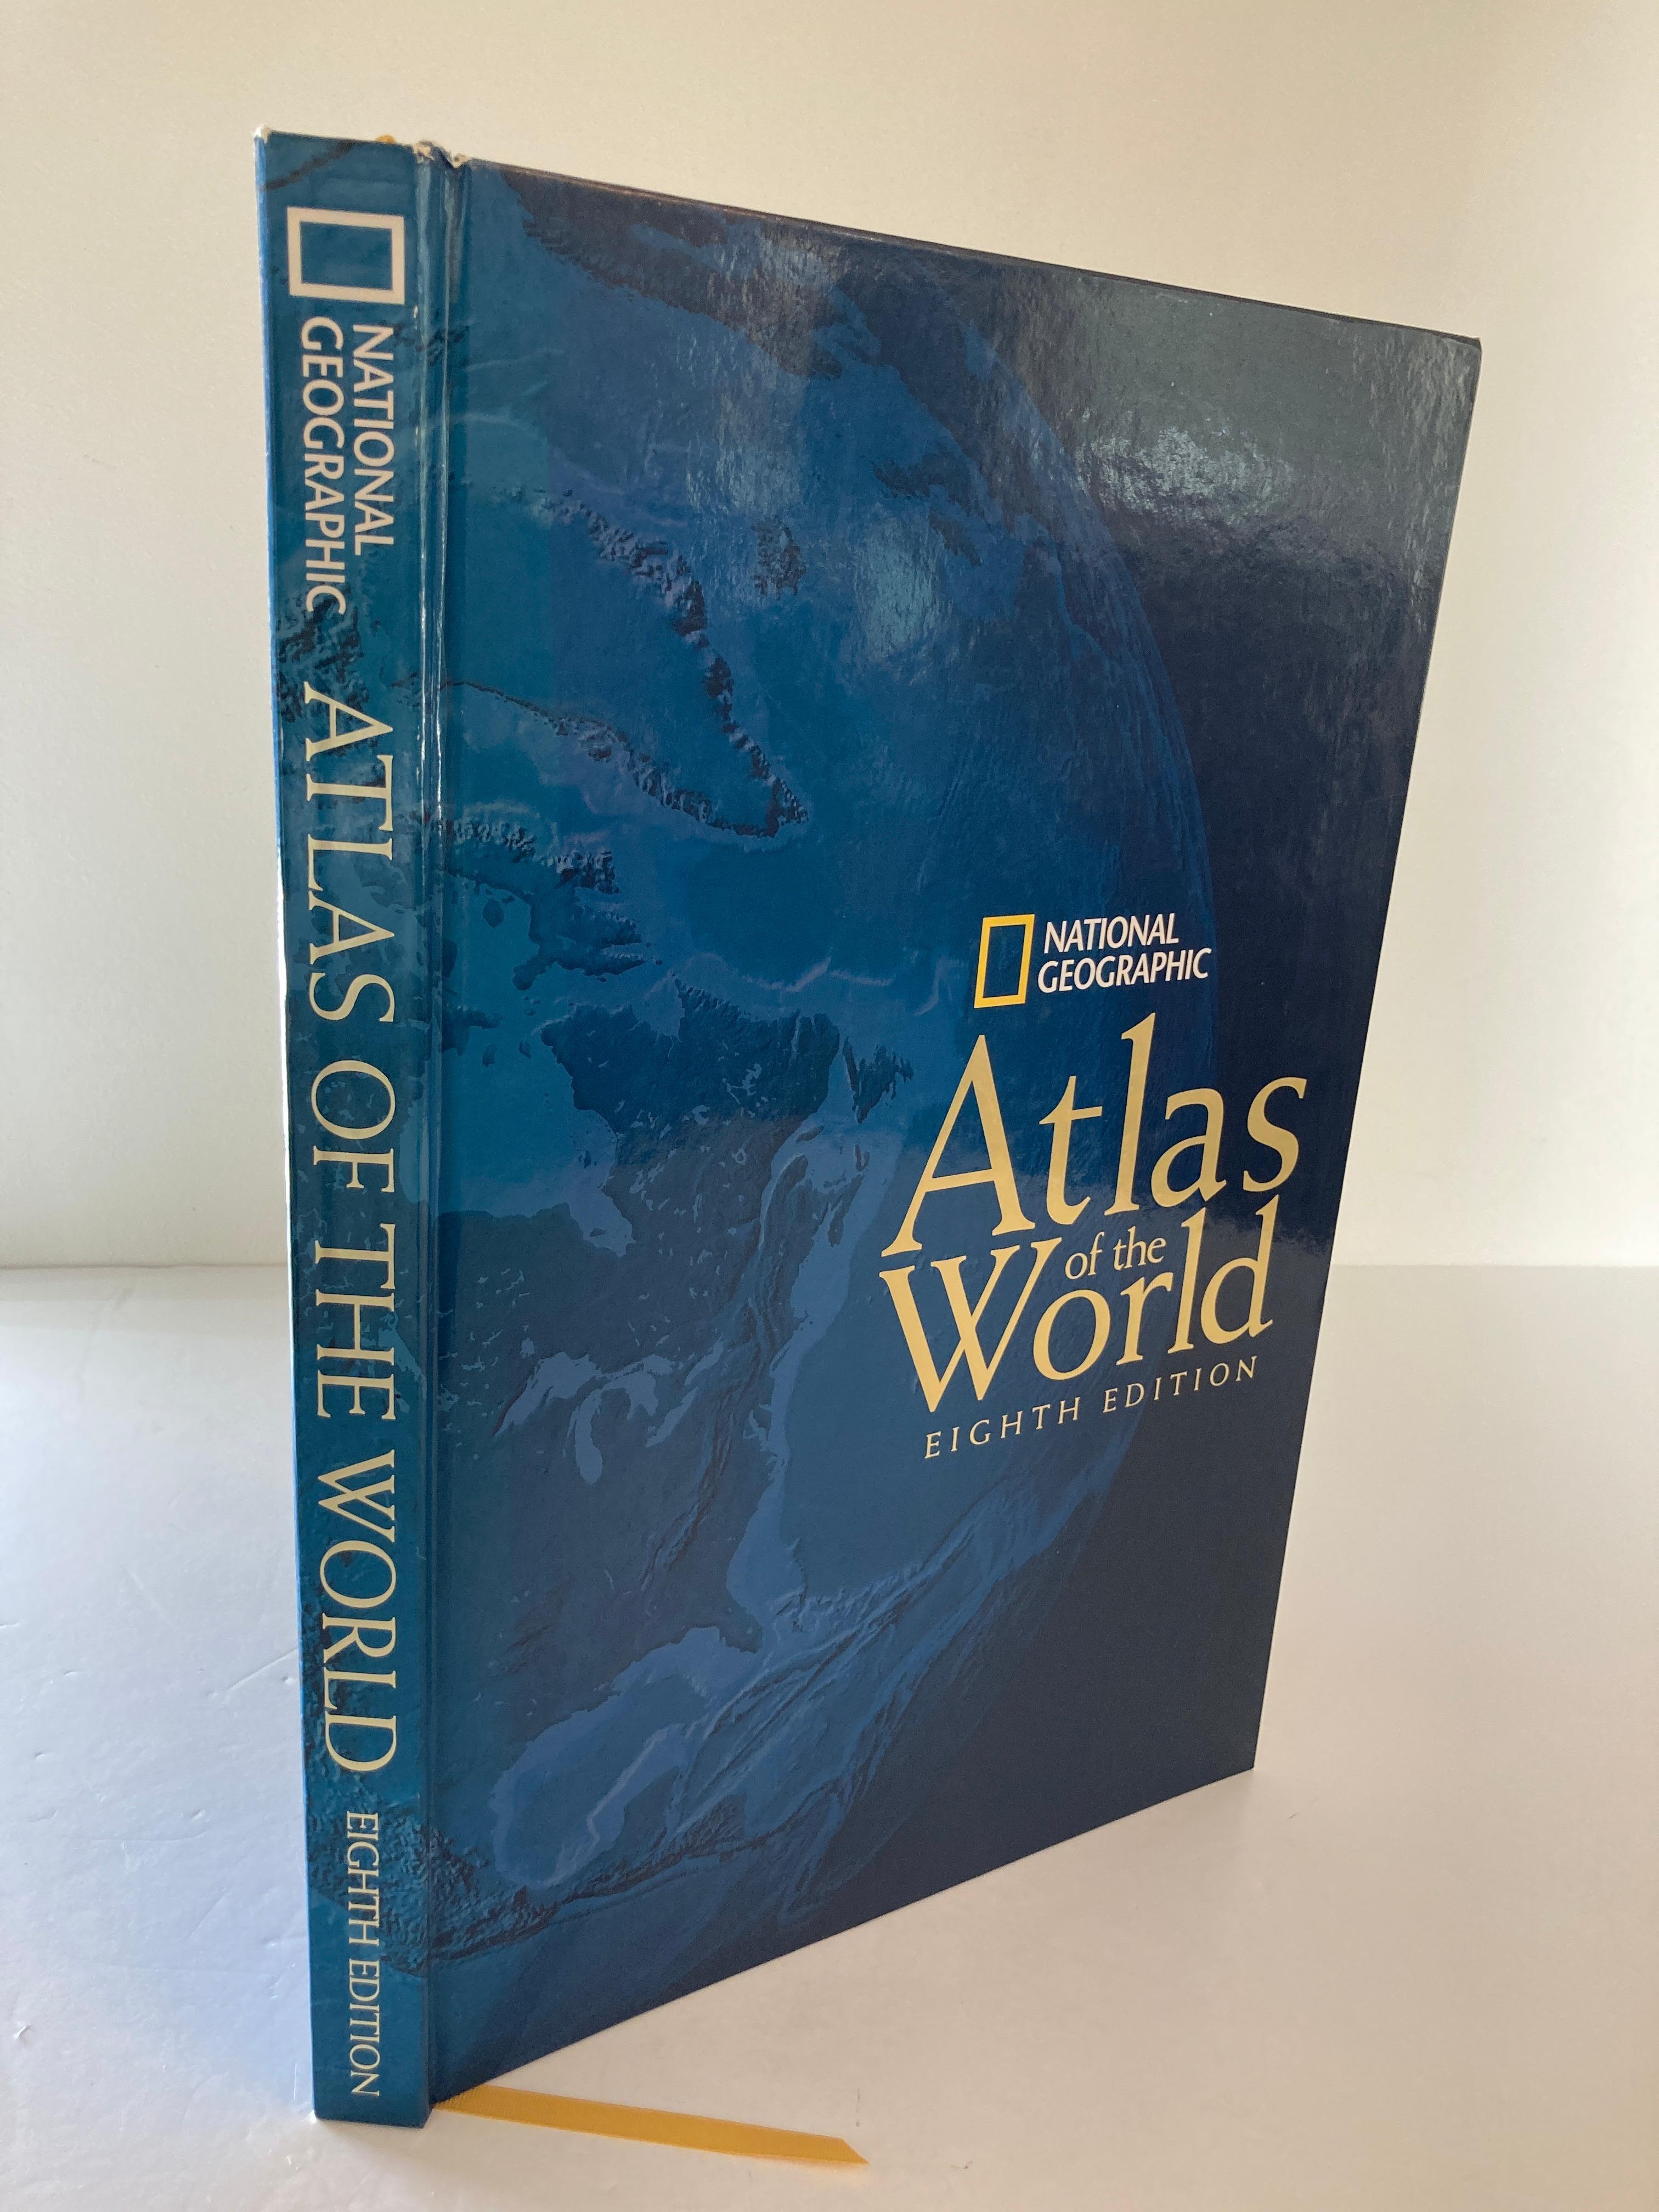 National Geographic Atlas of the World, Eighth Edition Hardcover Book For Sale 6